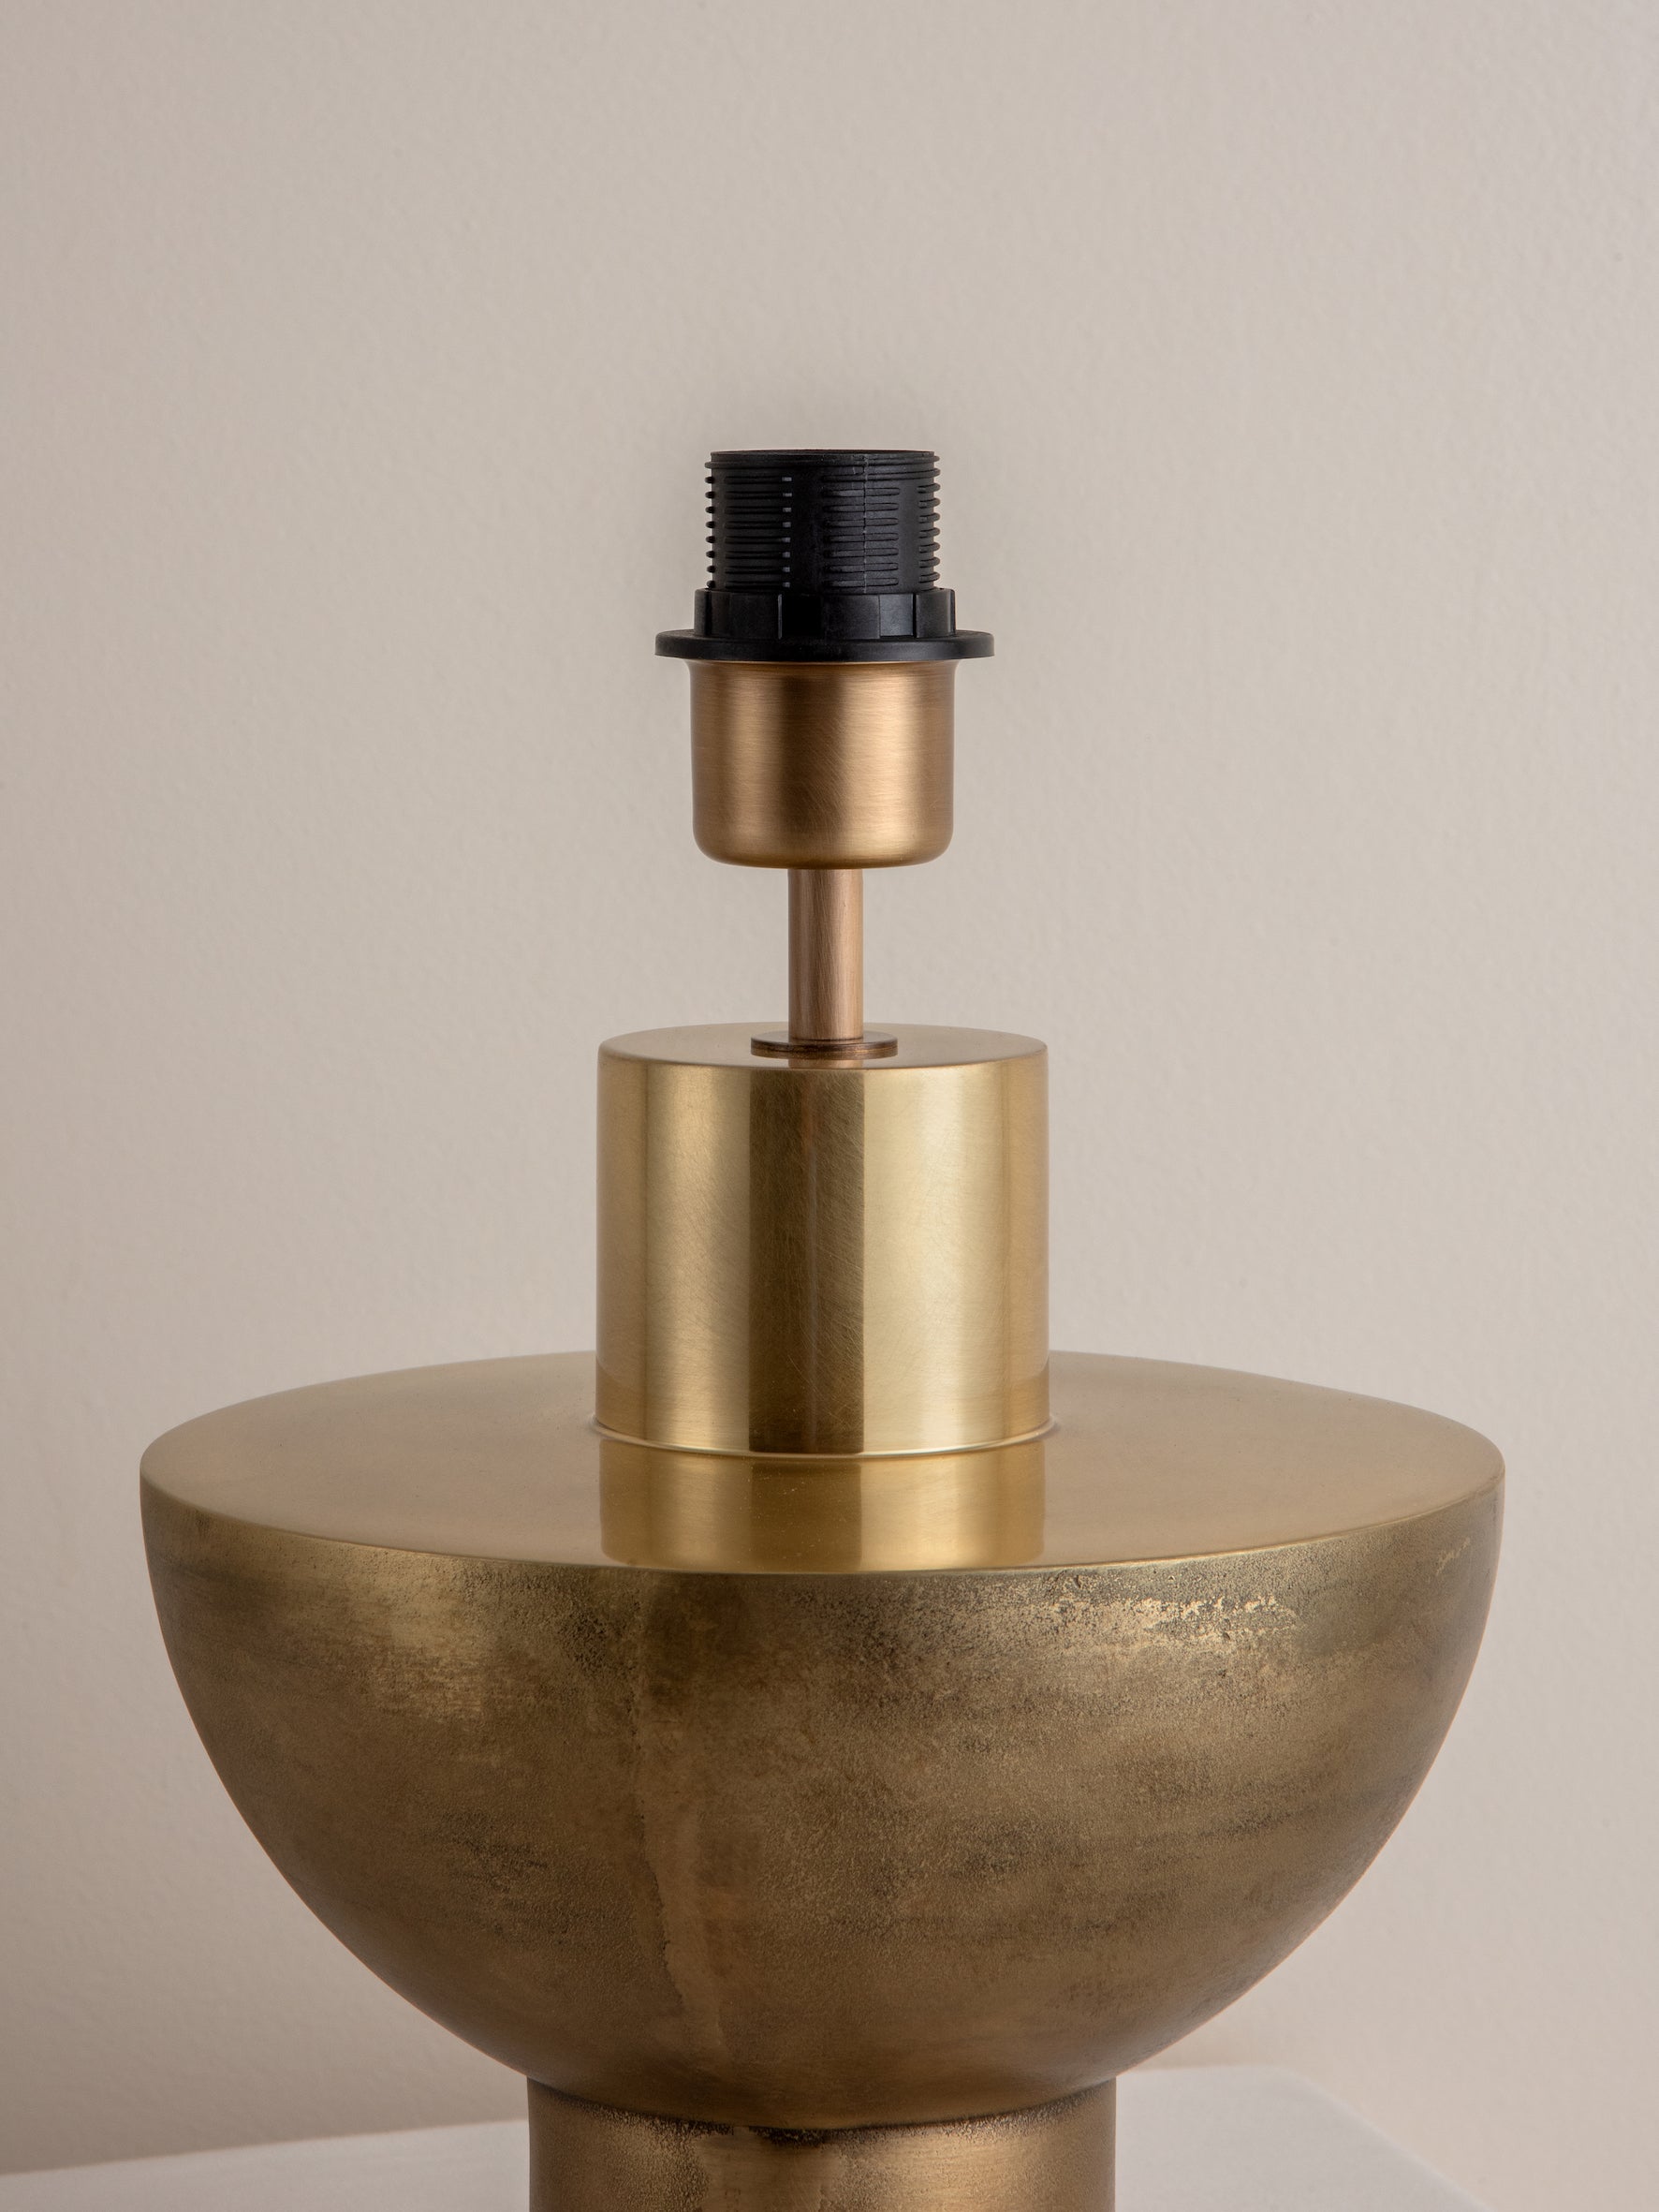 Editions brass lamp with + green lacquer shade | Table Lamp | Lights & Lamps | UK | Modern Affordable Designer Lighting